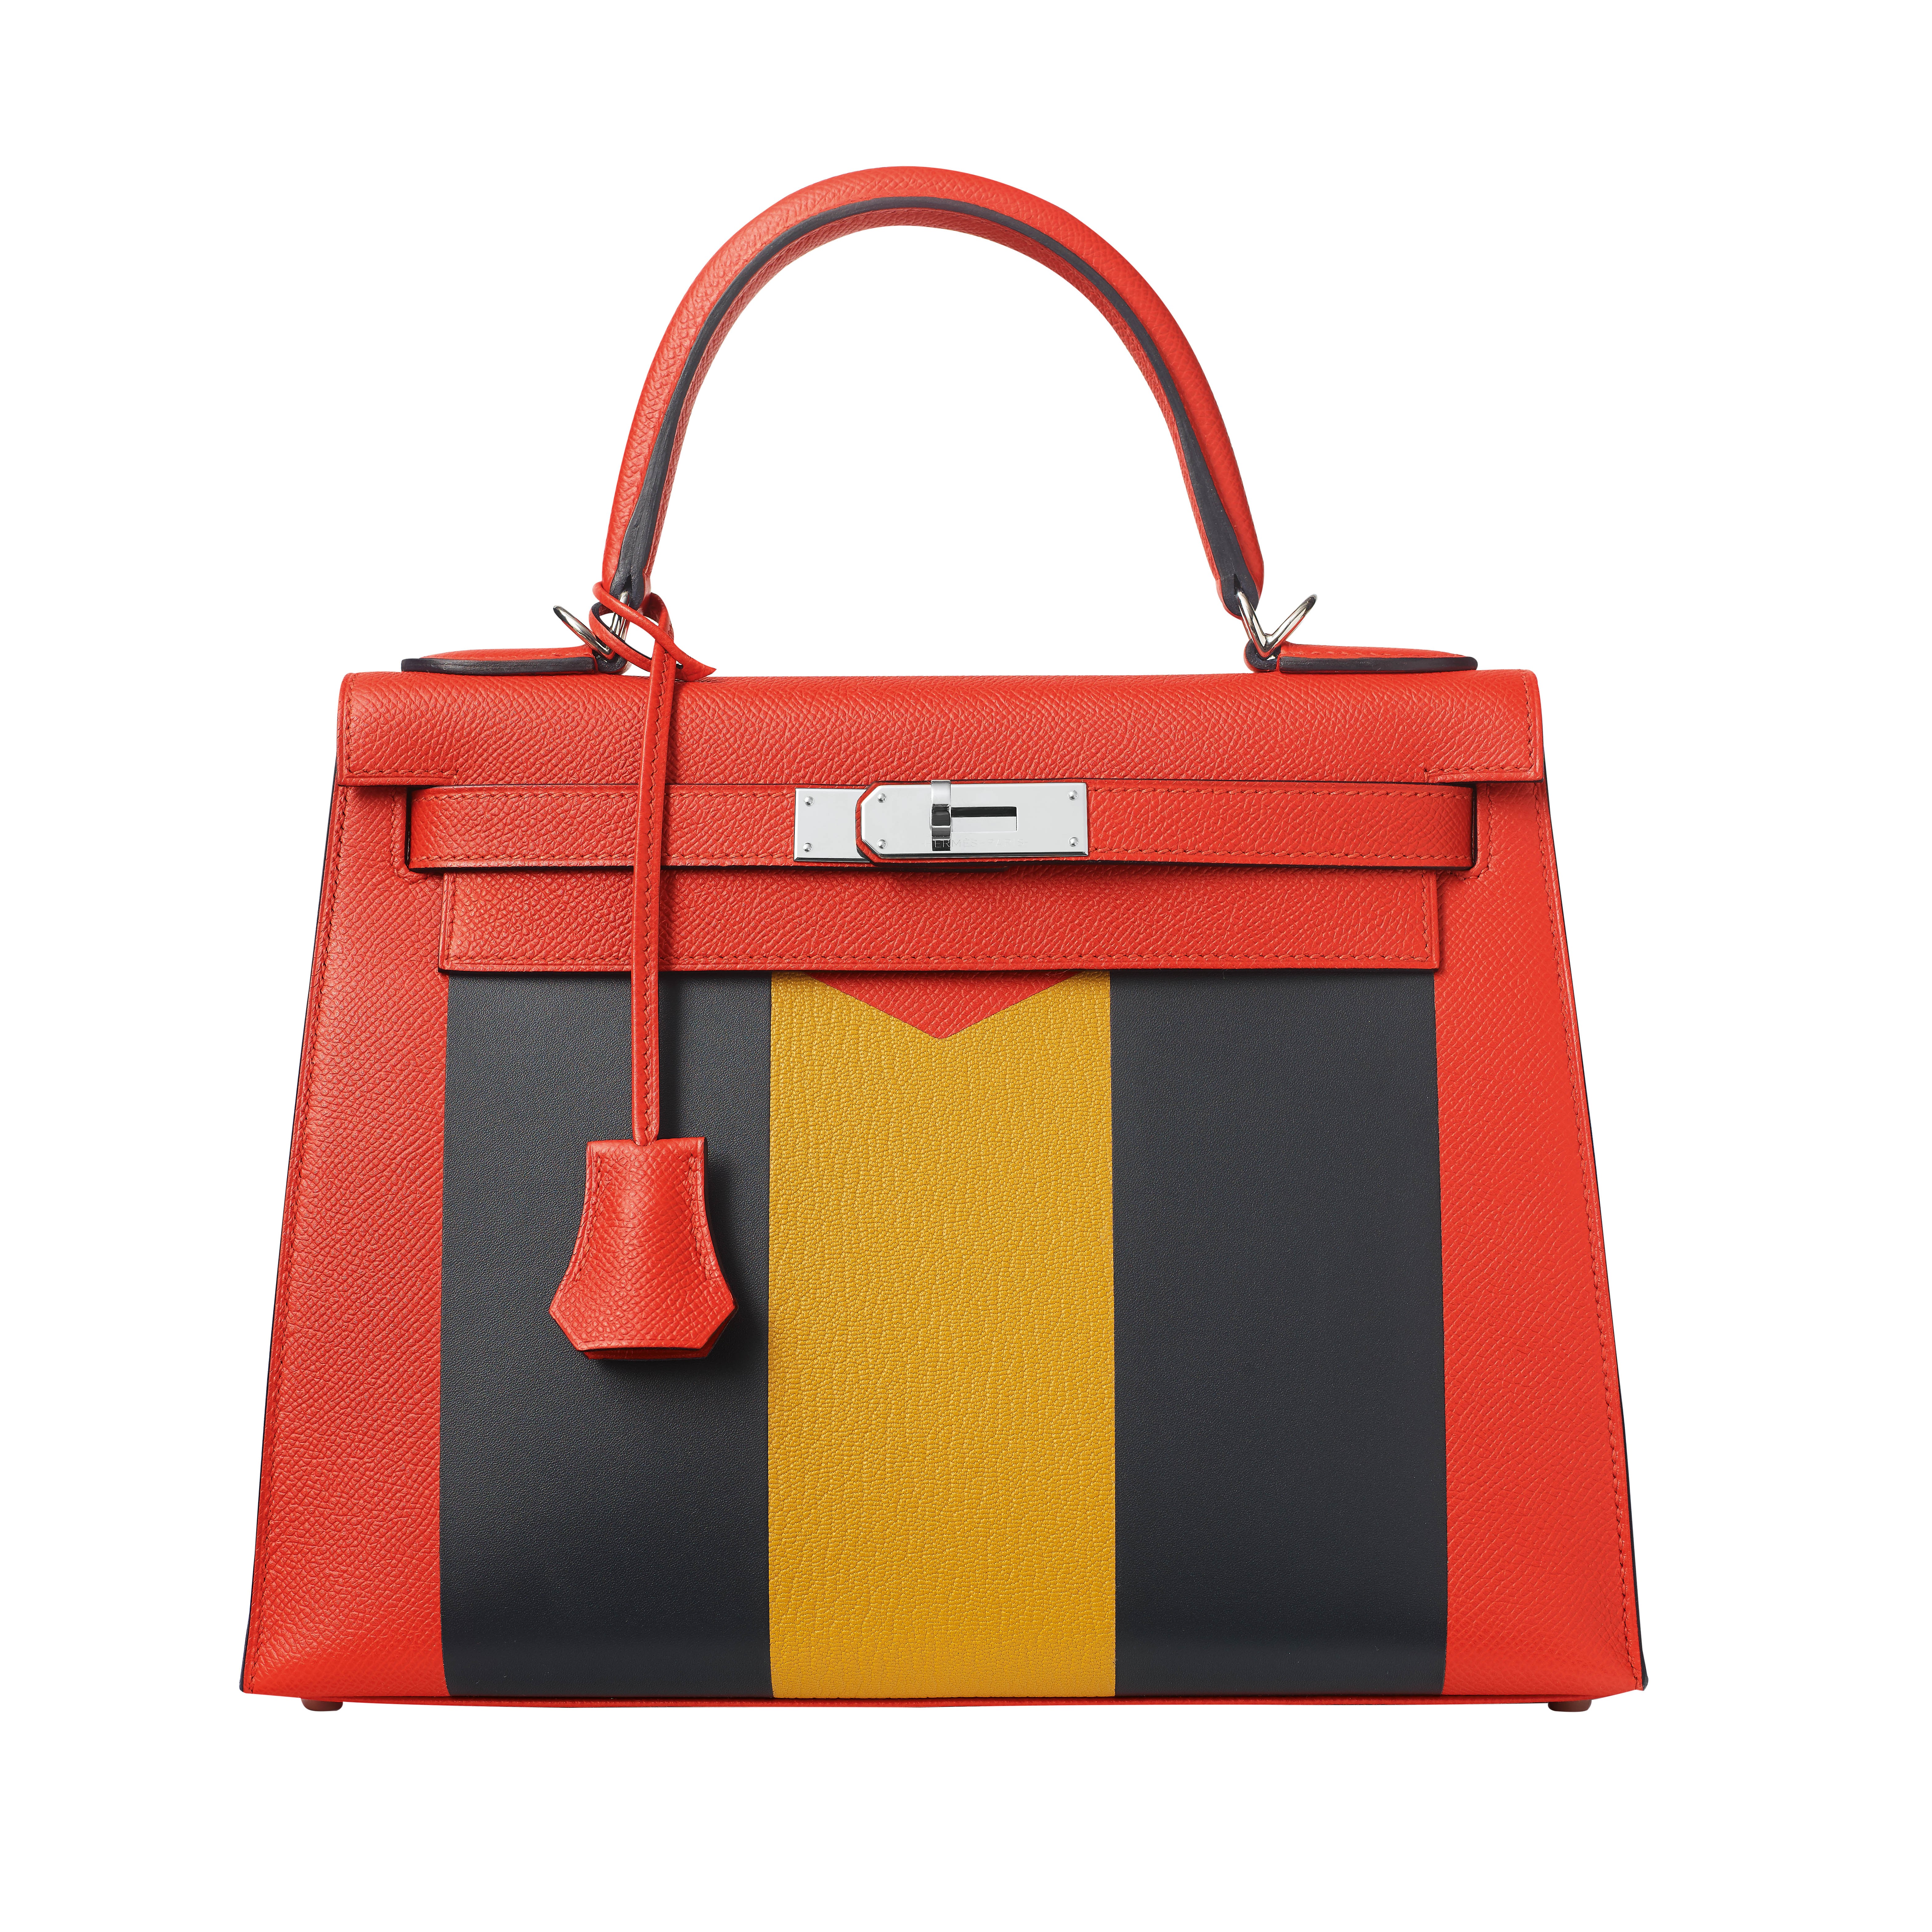 Mysterious ‘Mademoiselle D’ inspires Hermès’ classic luxury bags | Style Magazine | South China ...